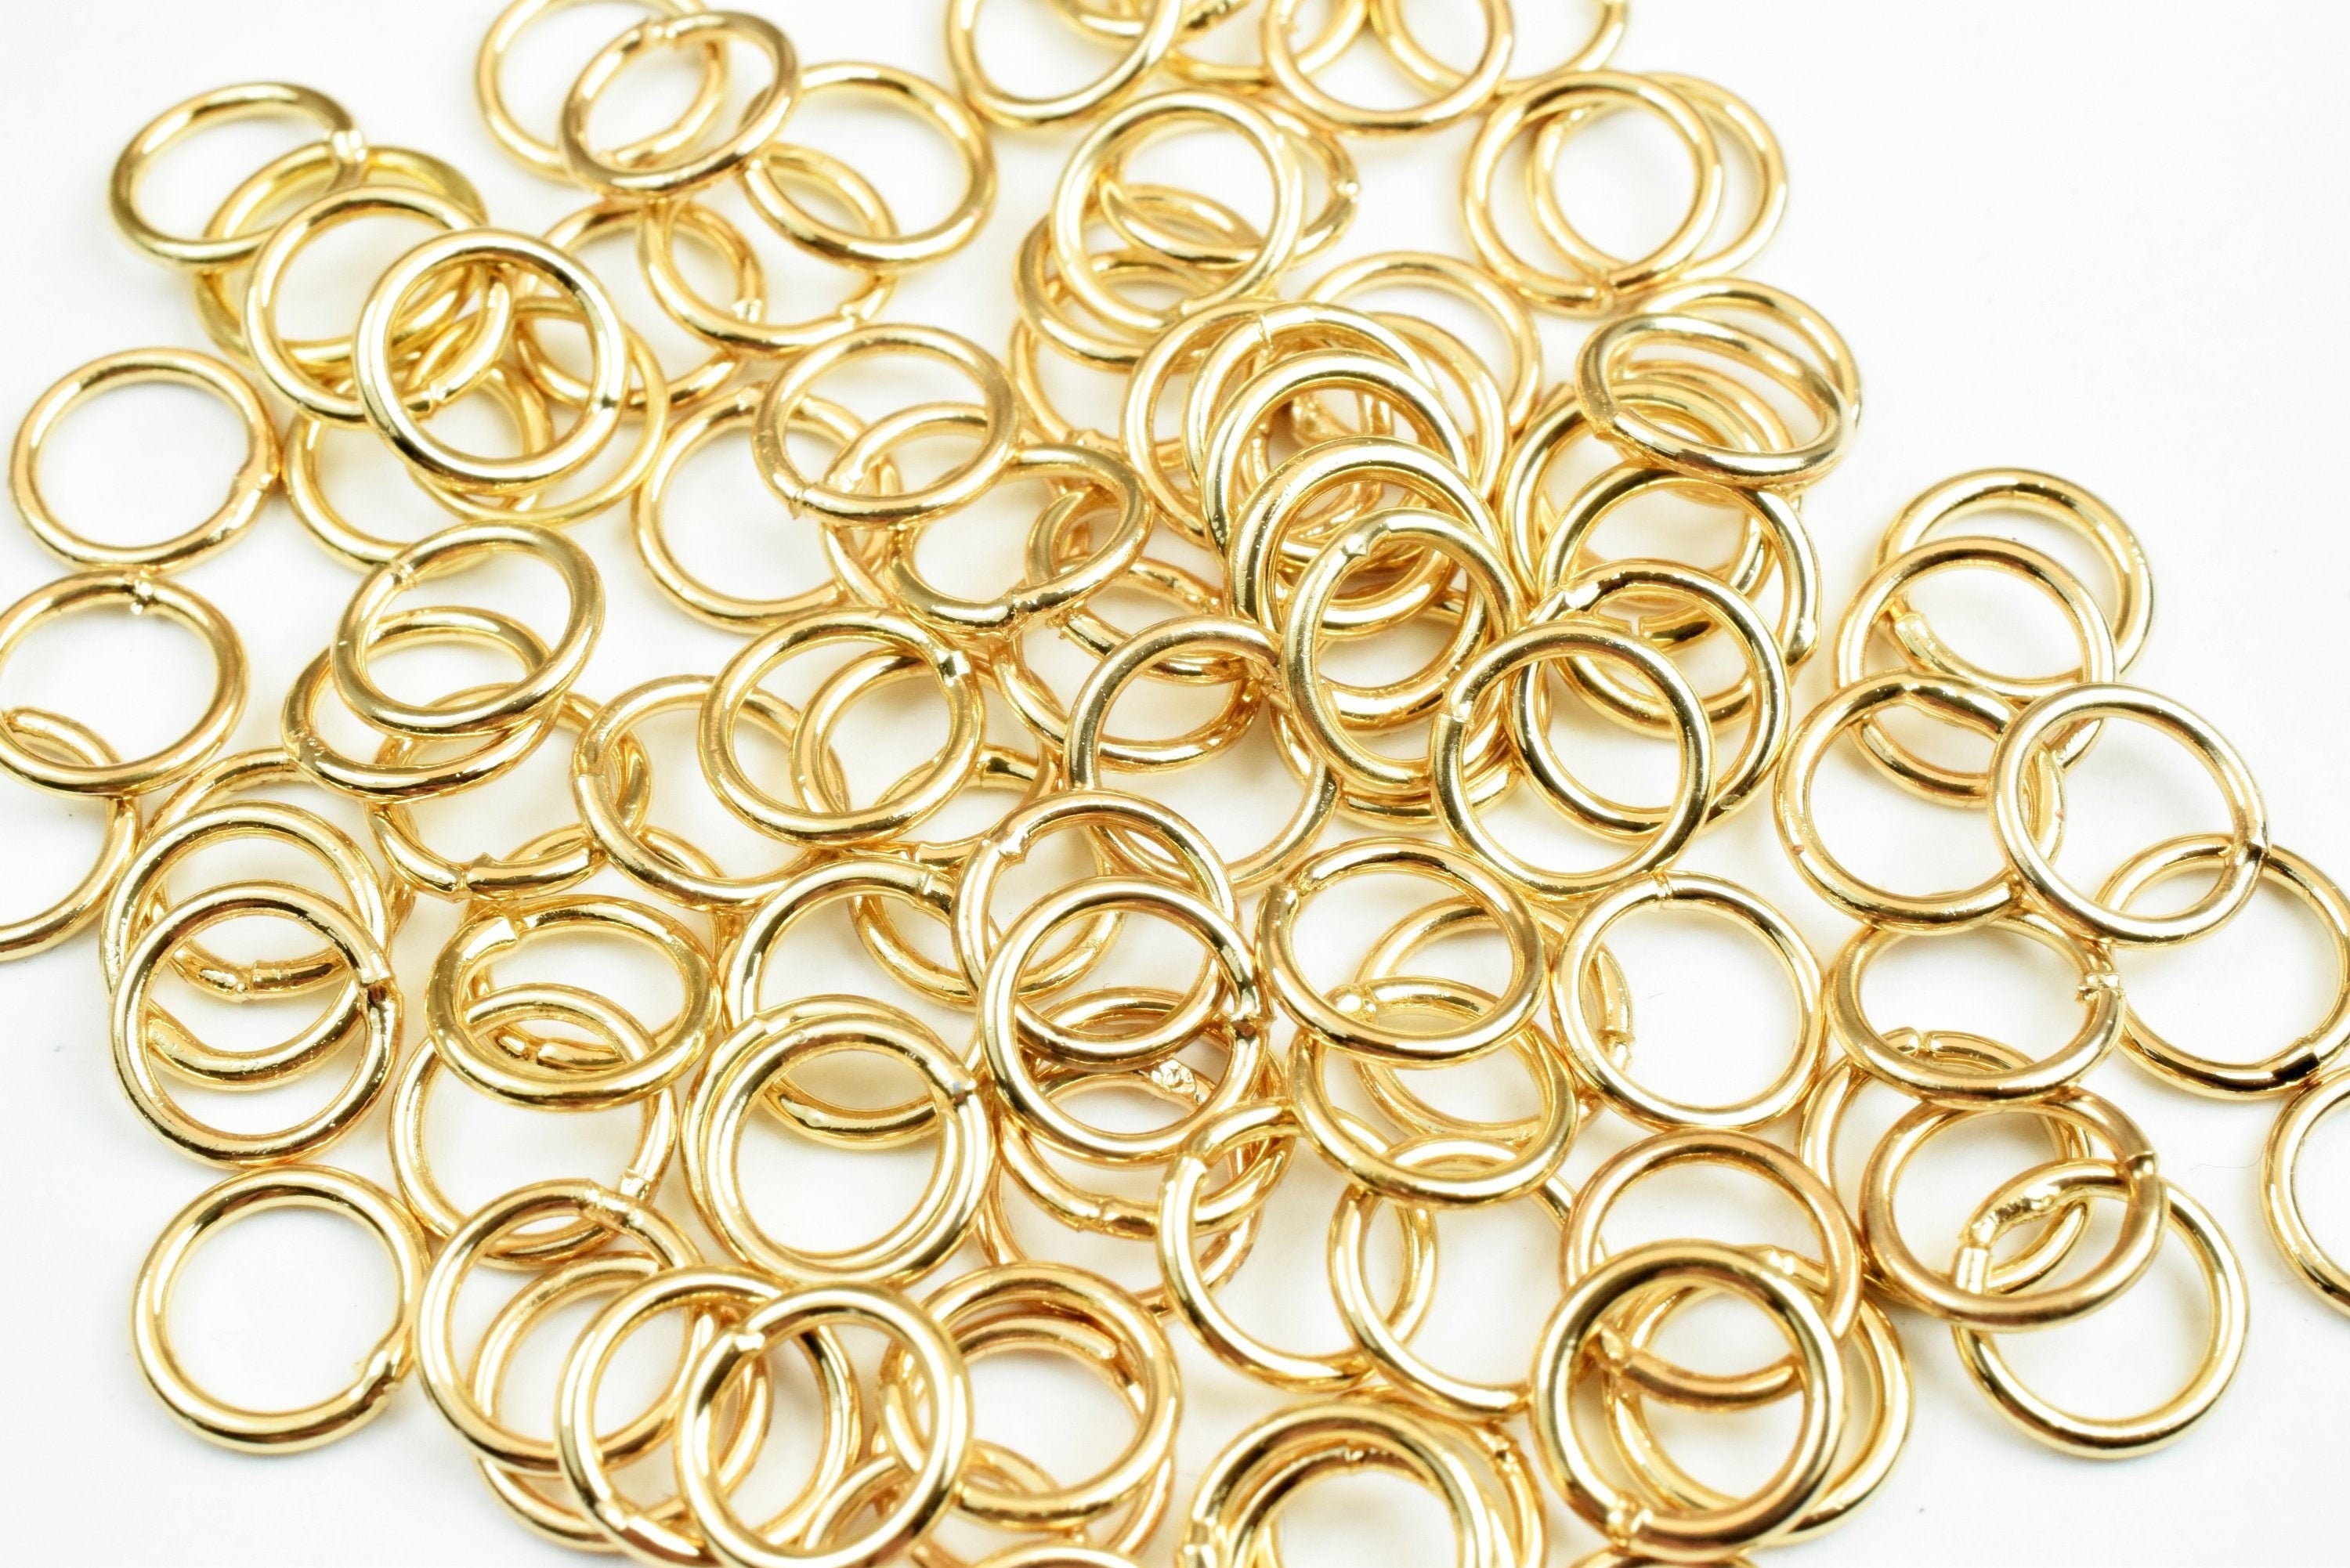  BENECREAT 30Pcs 4/6/8mm 14K Gold Plated Jump Ring Jump Rings  for Jewelry Making Gold Open Jump Rings Bulk for DIY Craft Earring Necklace  Bracelet